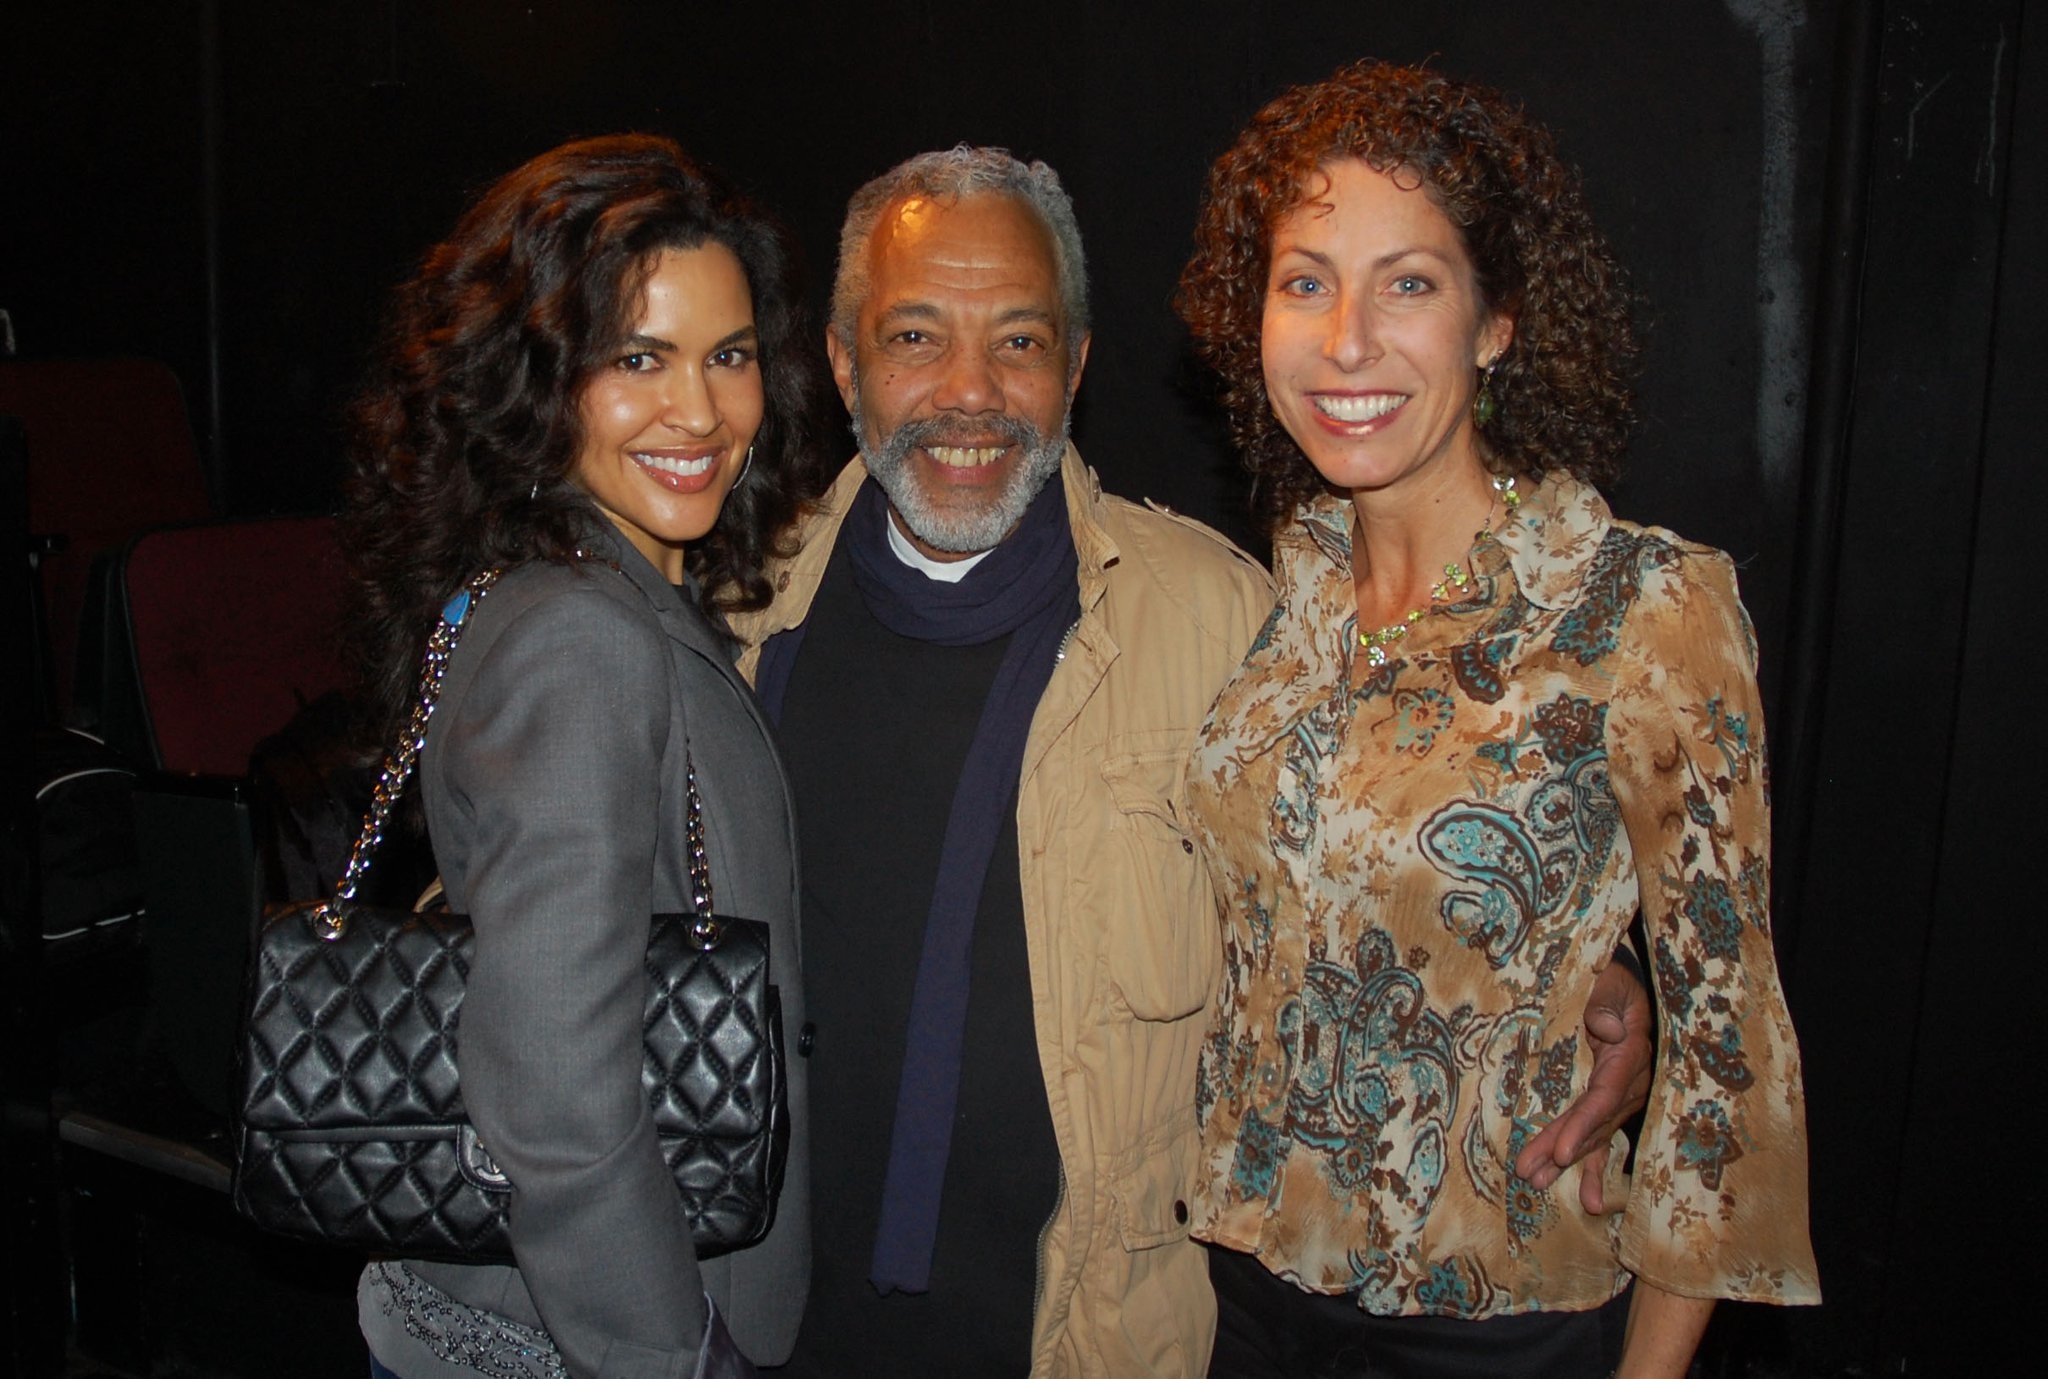 With friends, Ion Overland and Nicole Stavro Espinosa, after his performance in the original play Julia in Los Angeles before it's Off Broadway run.